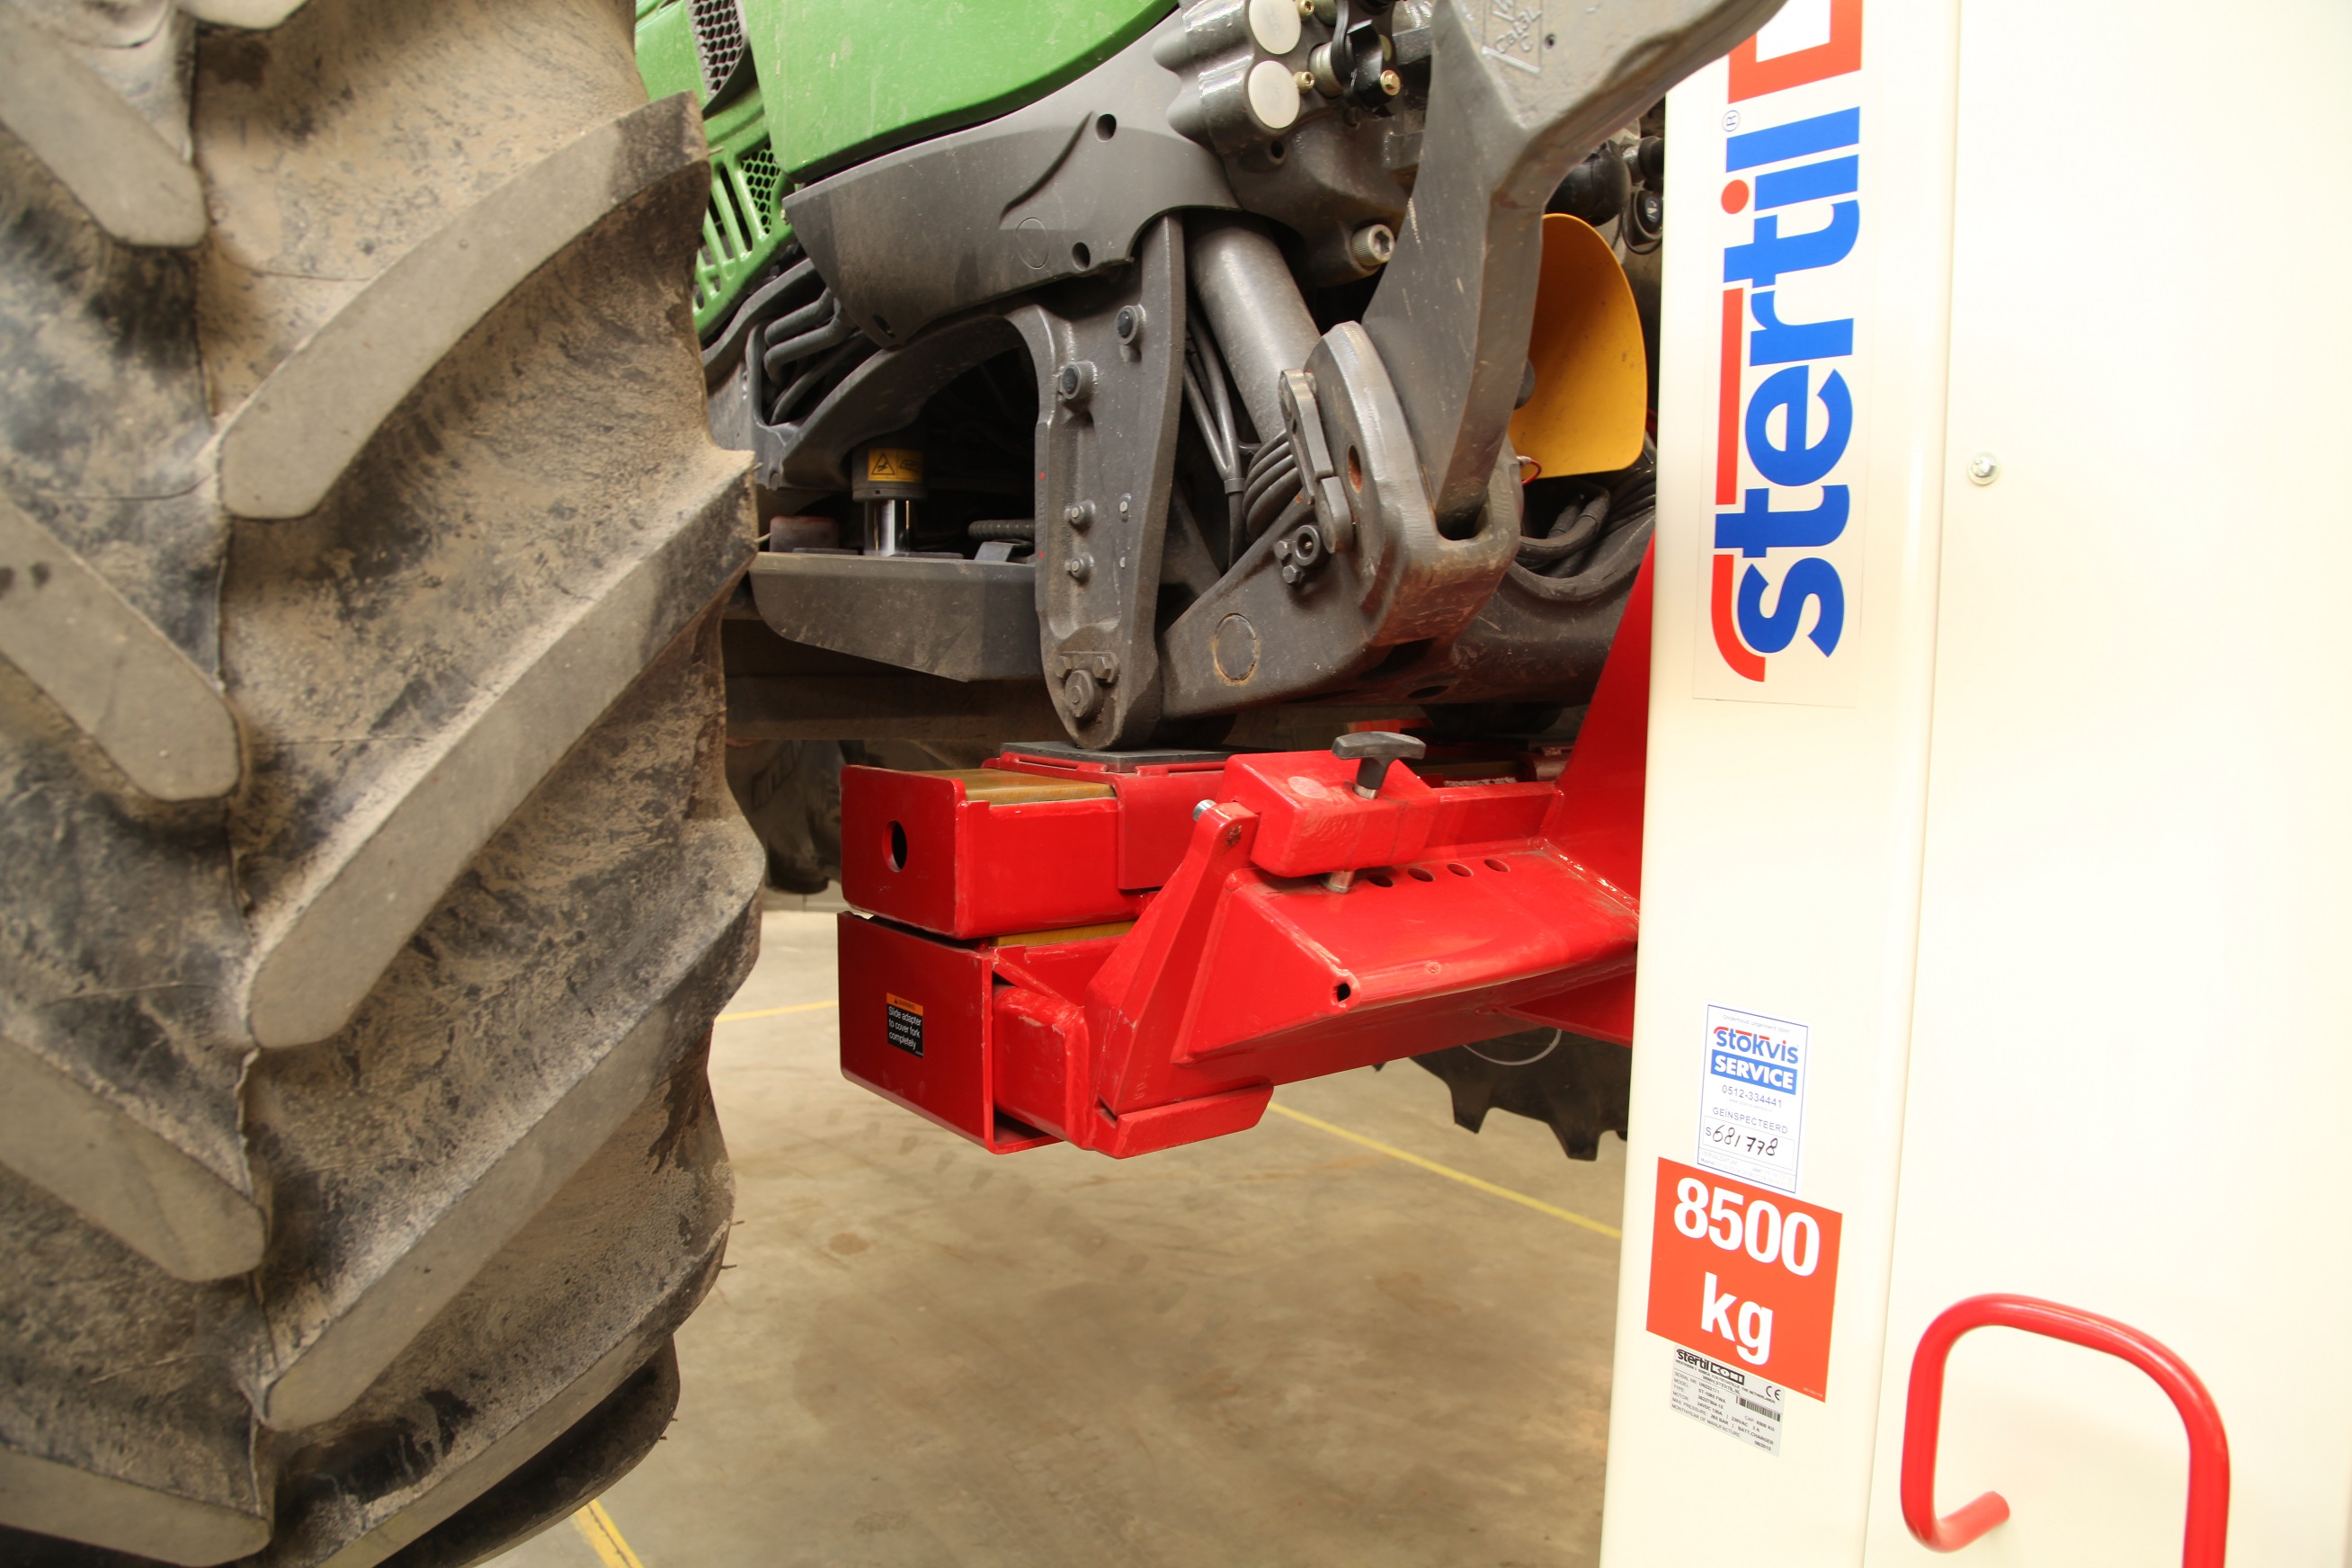 The agricultural multipurpose adapter is suitable for lifting tractors with two or three mobile columns